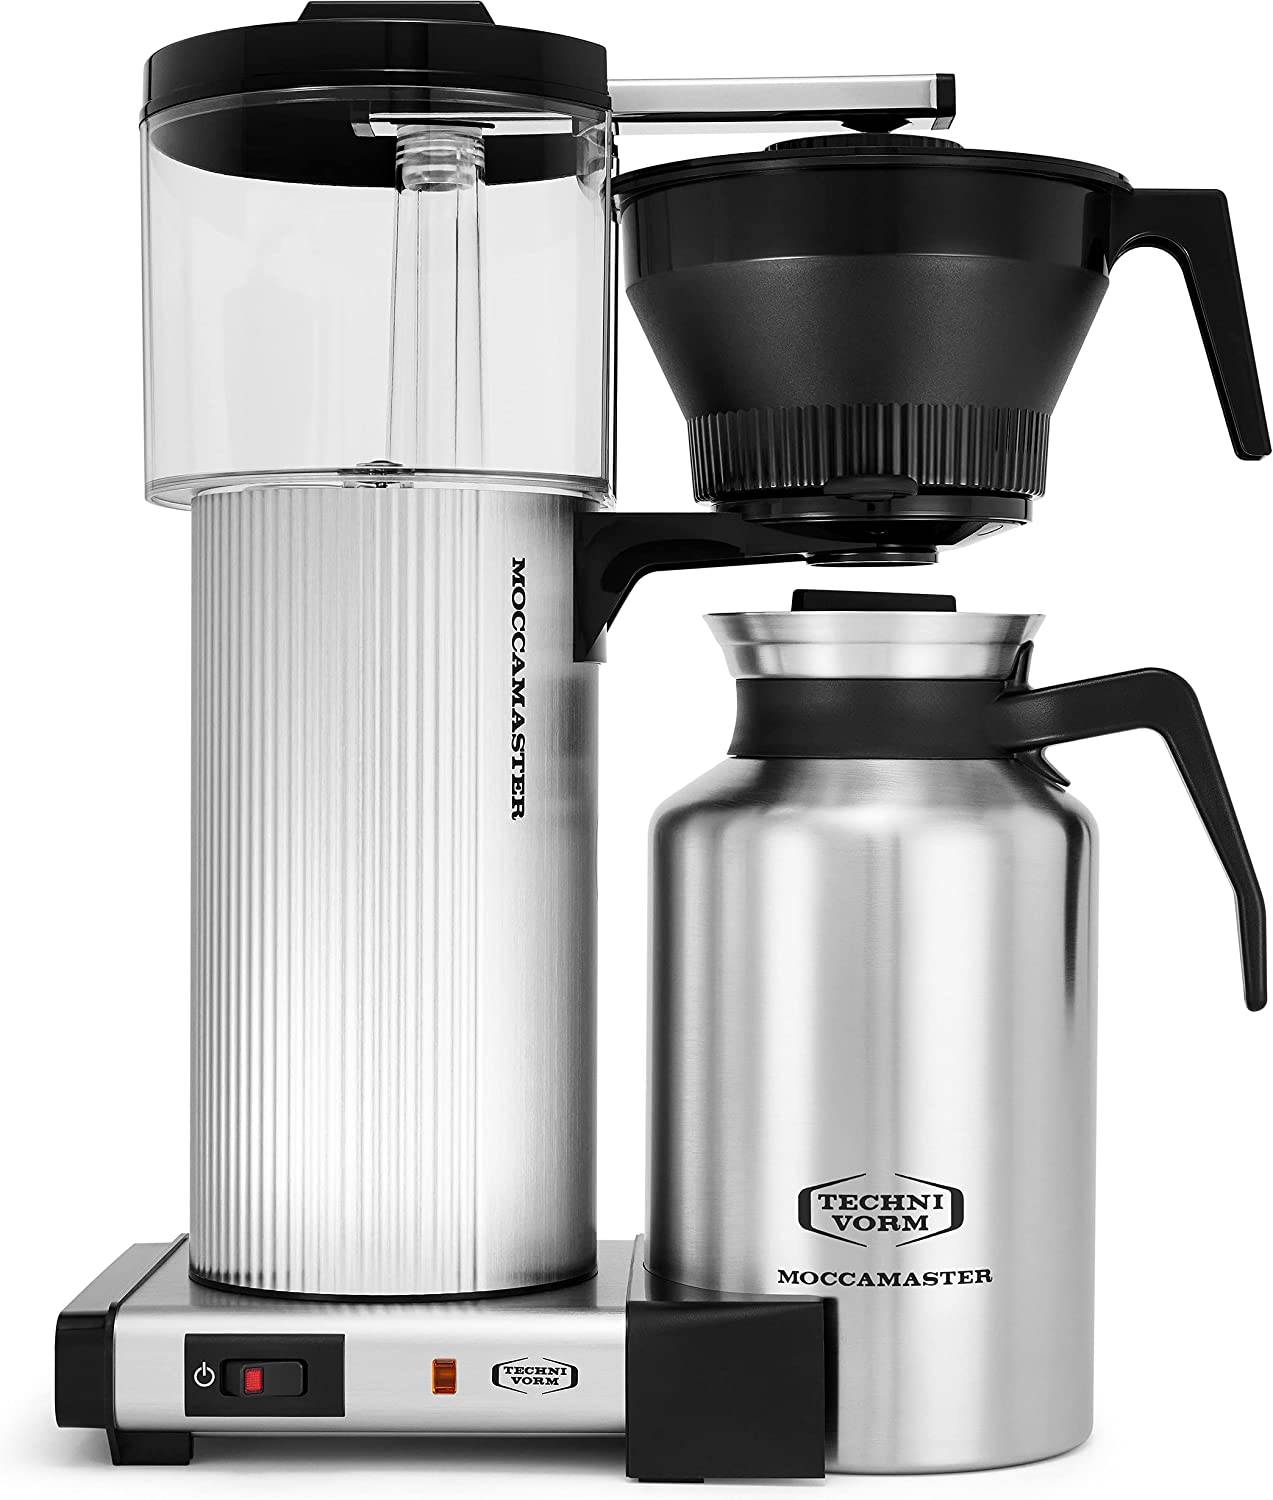 Moccamaster KBGV Select 10-Cup Coffee Maker in Polished Silver